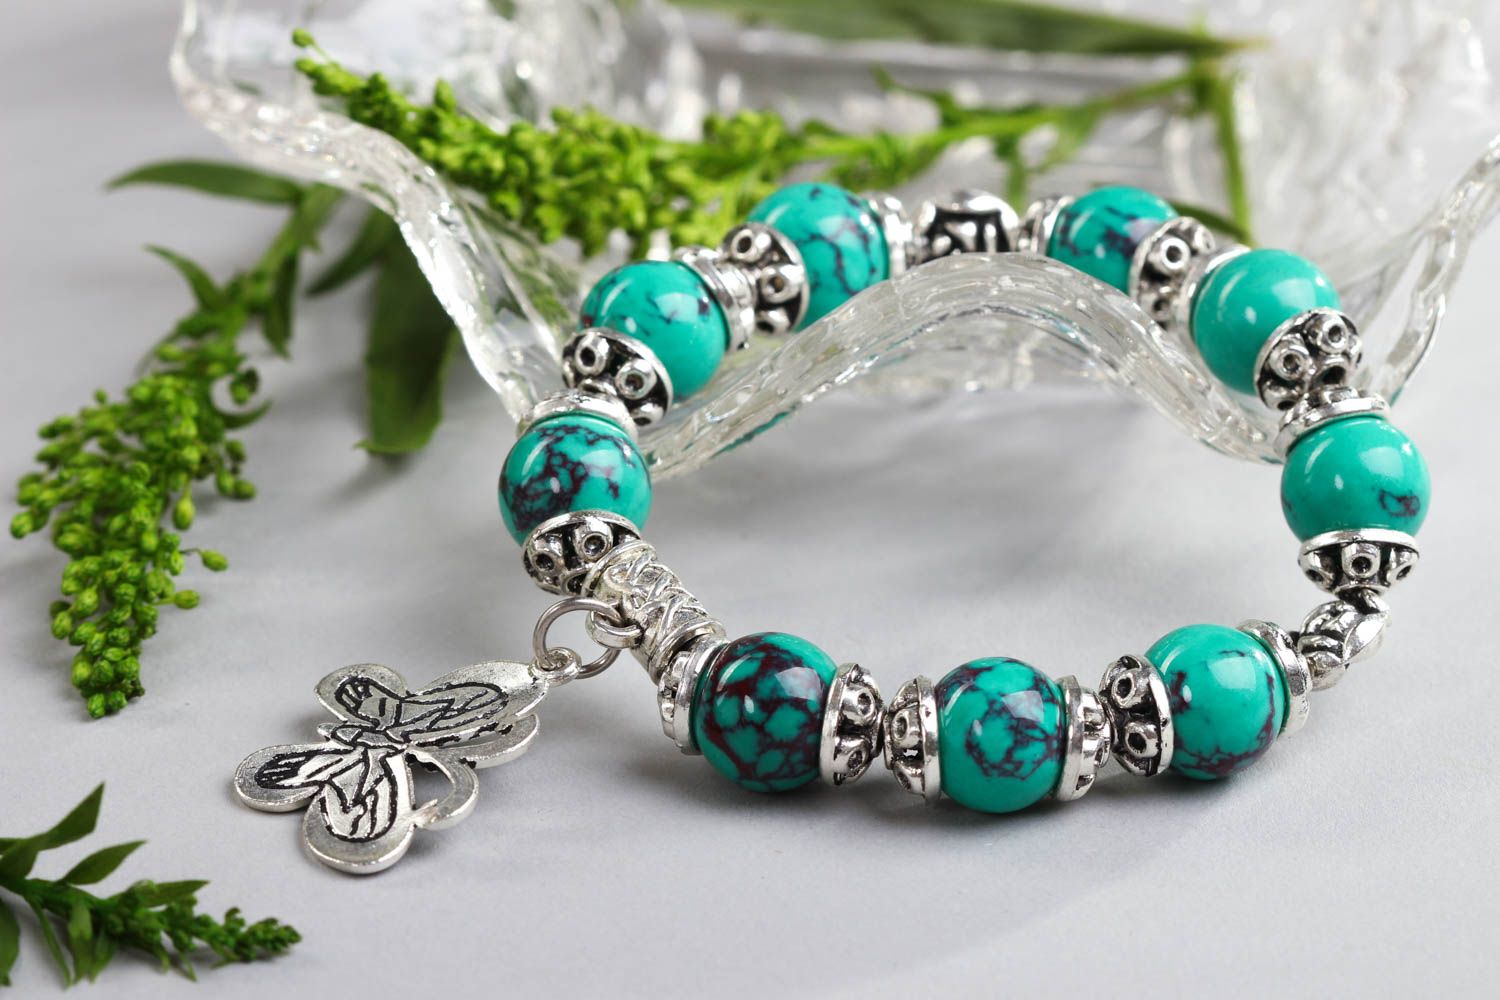 Natural turquoise stone beaded wrist bracelet with metal charms and central butterfly charm photo 1